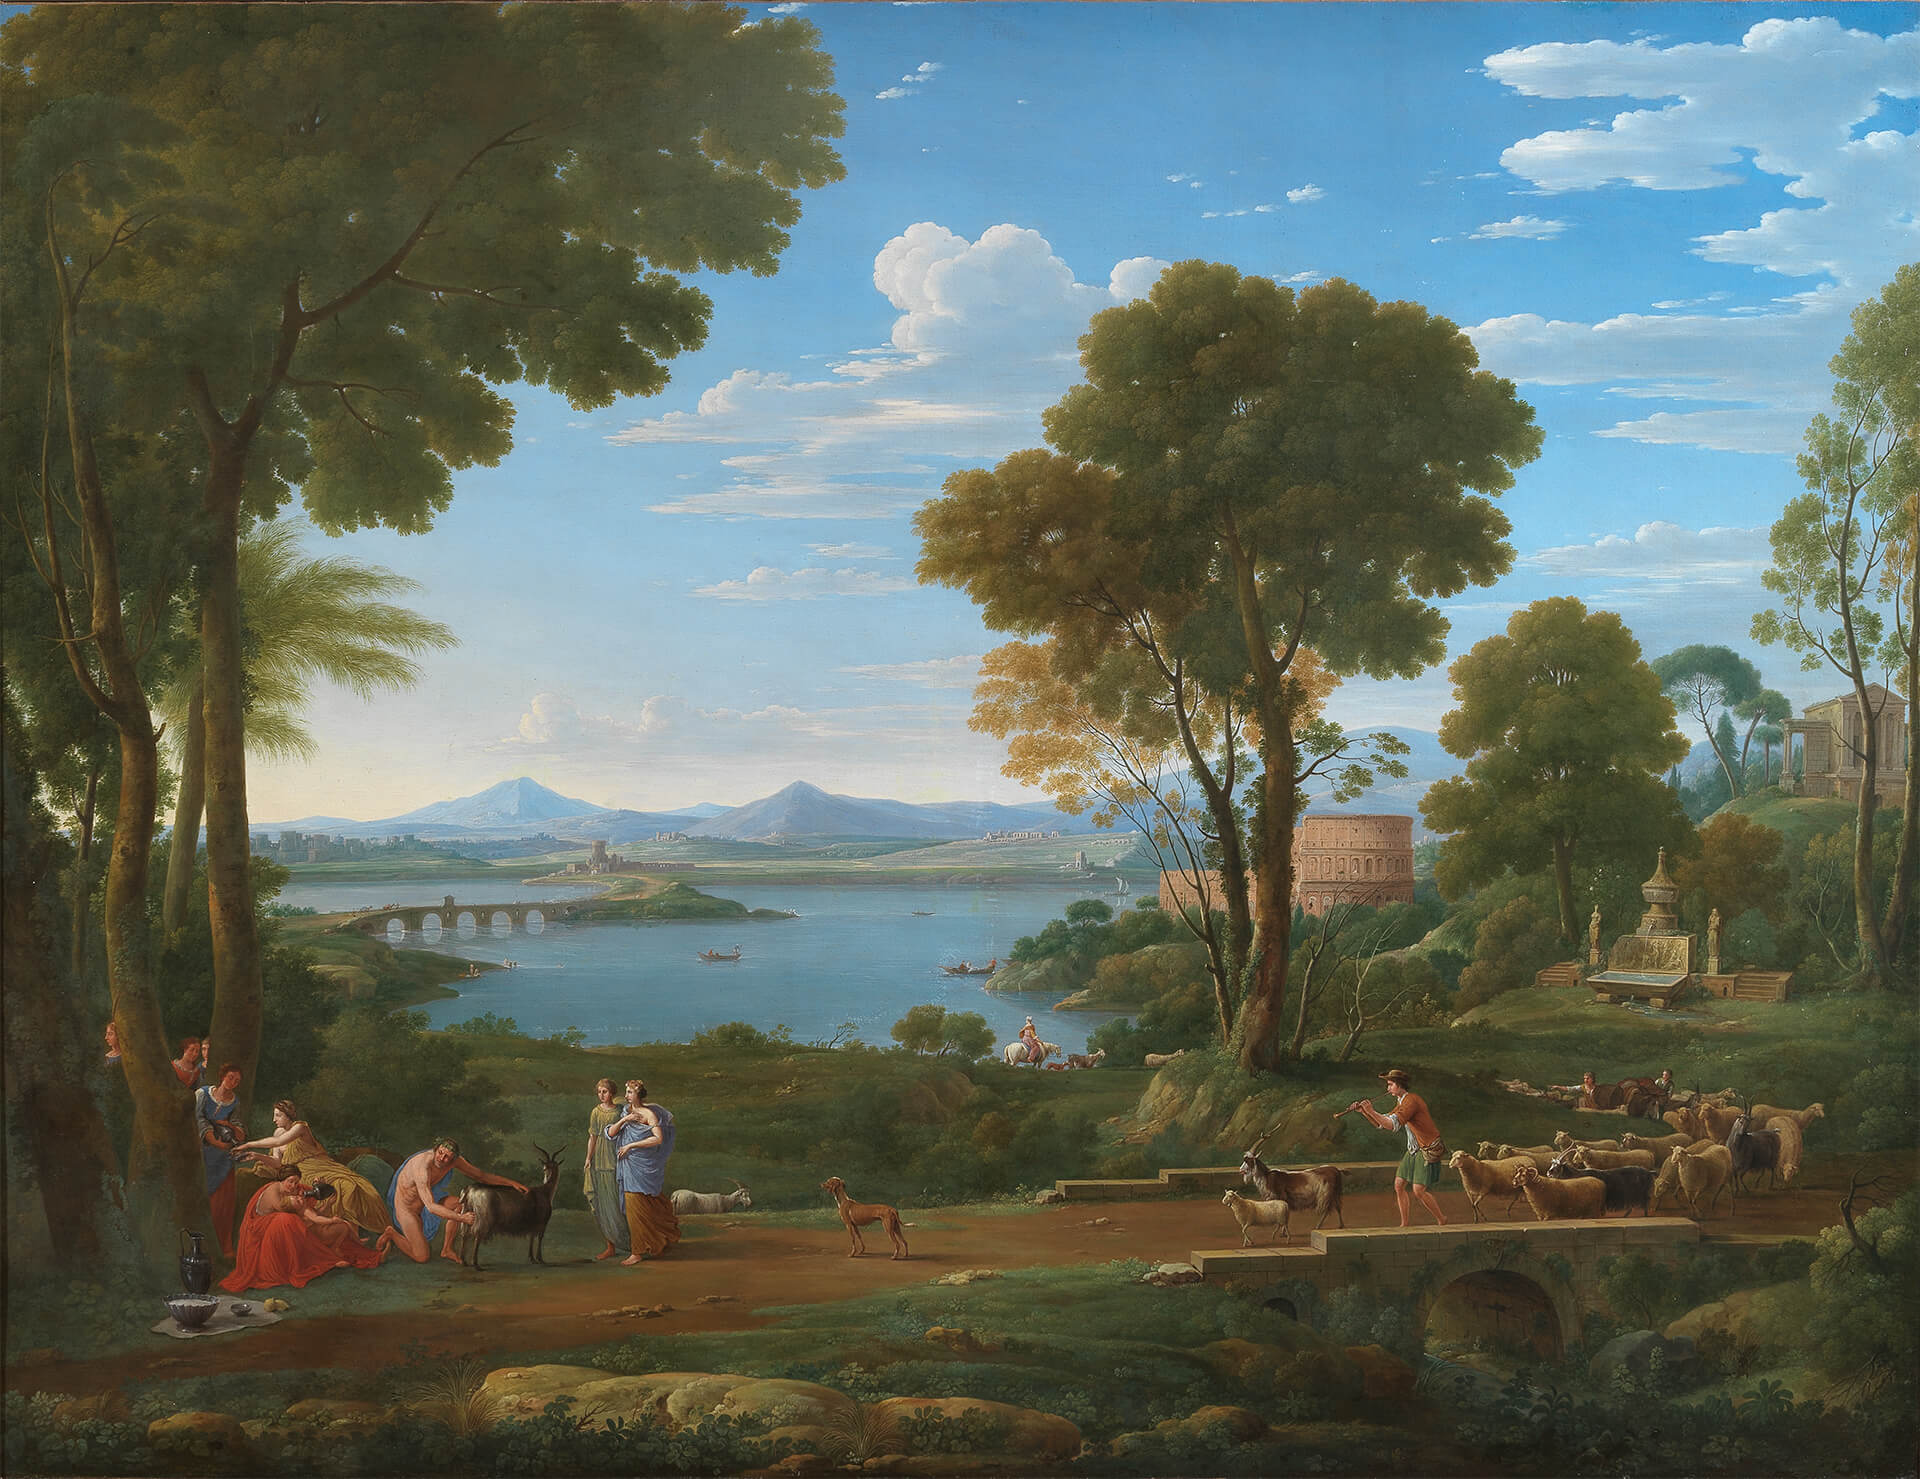 An Italianate landscape with the nurture of Jupiter and a goatherd leading his flock, a capriccio of the Colosseum in the background